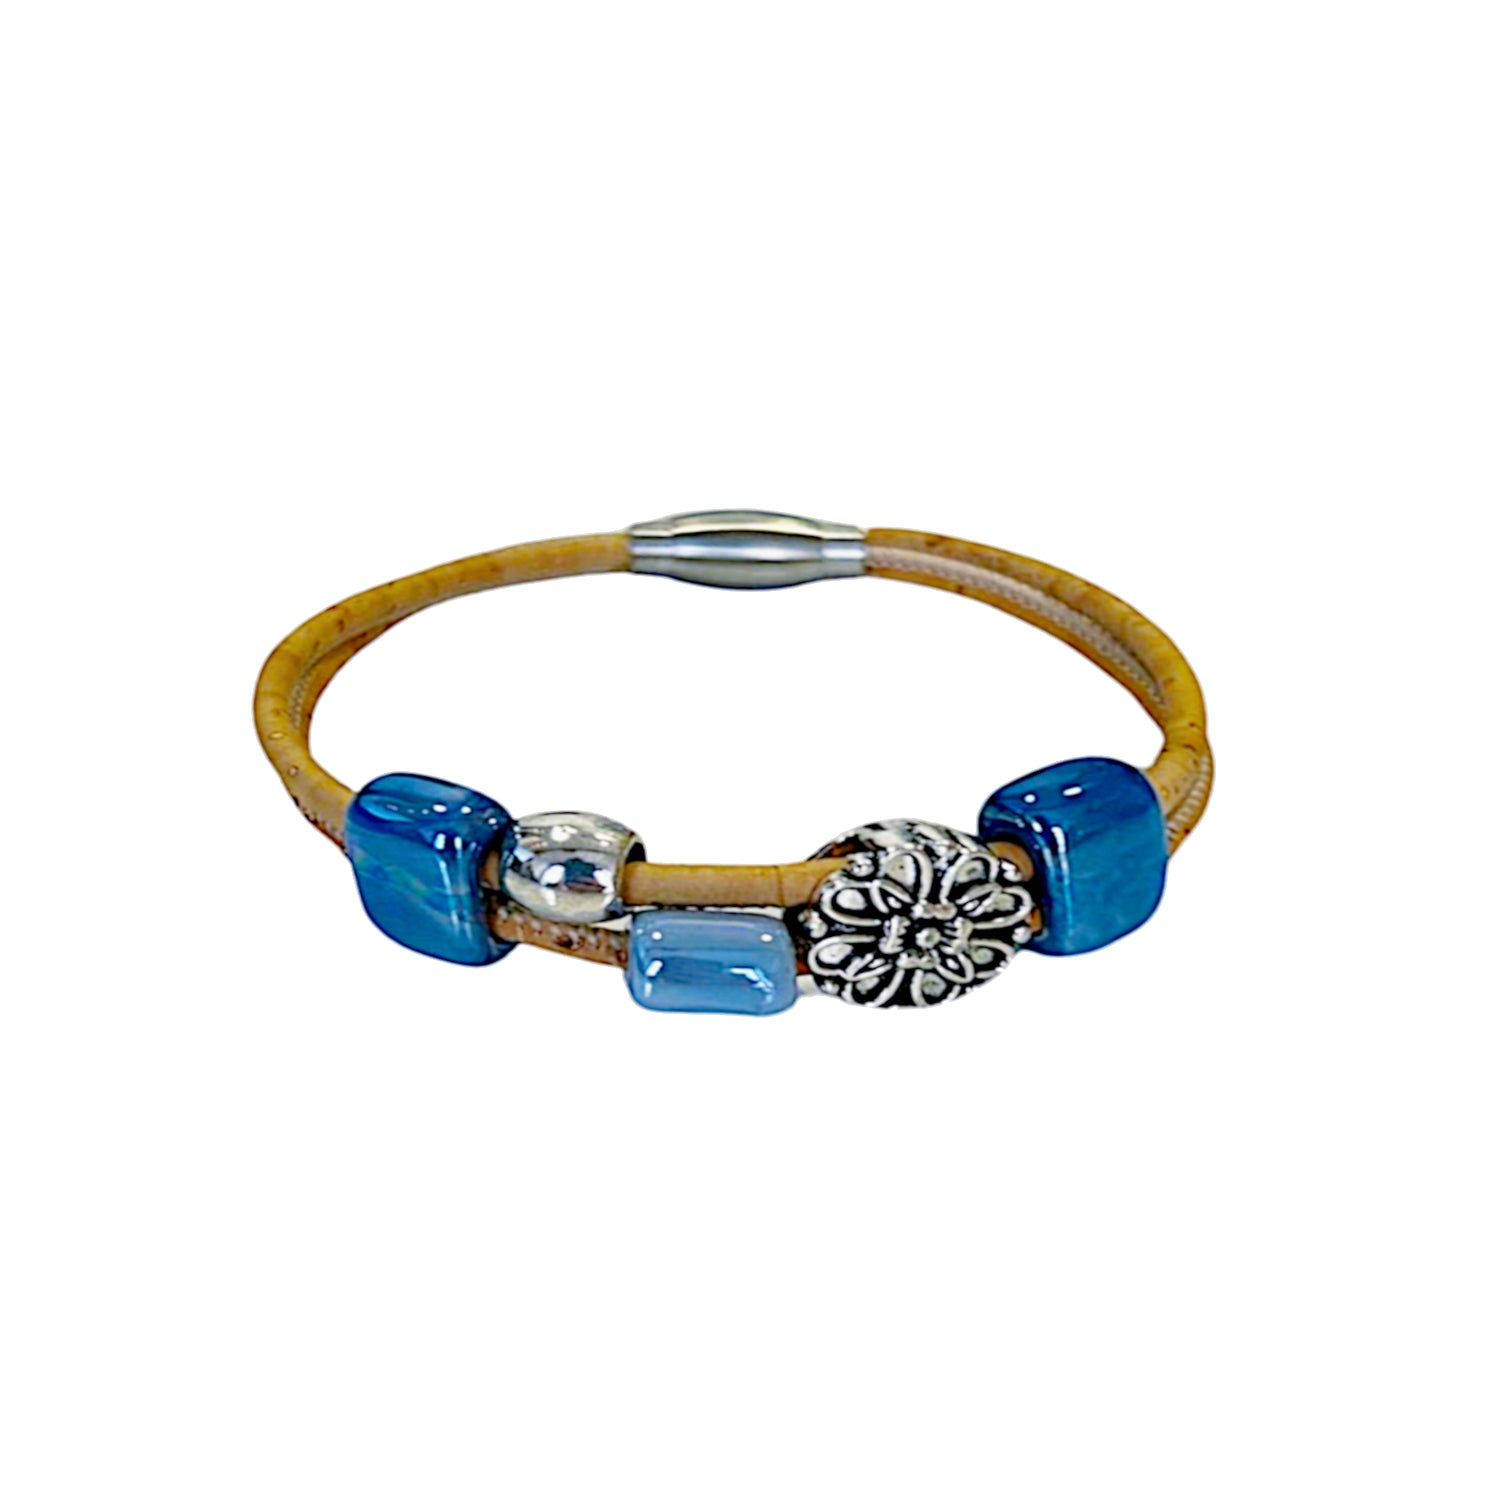 Cork Medal - Ocean (bracelet) - Cork and Company | Made in Portugal | Vegan Eco-Friendly Fashion